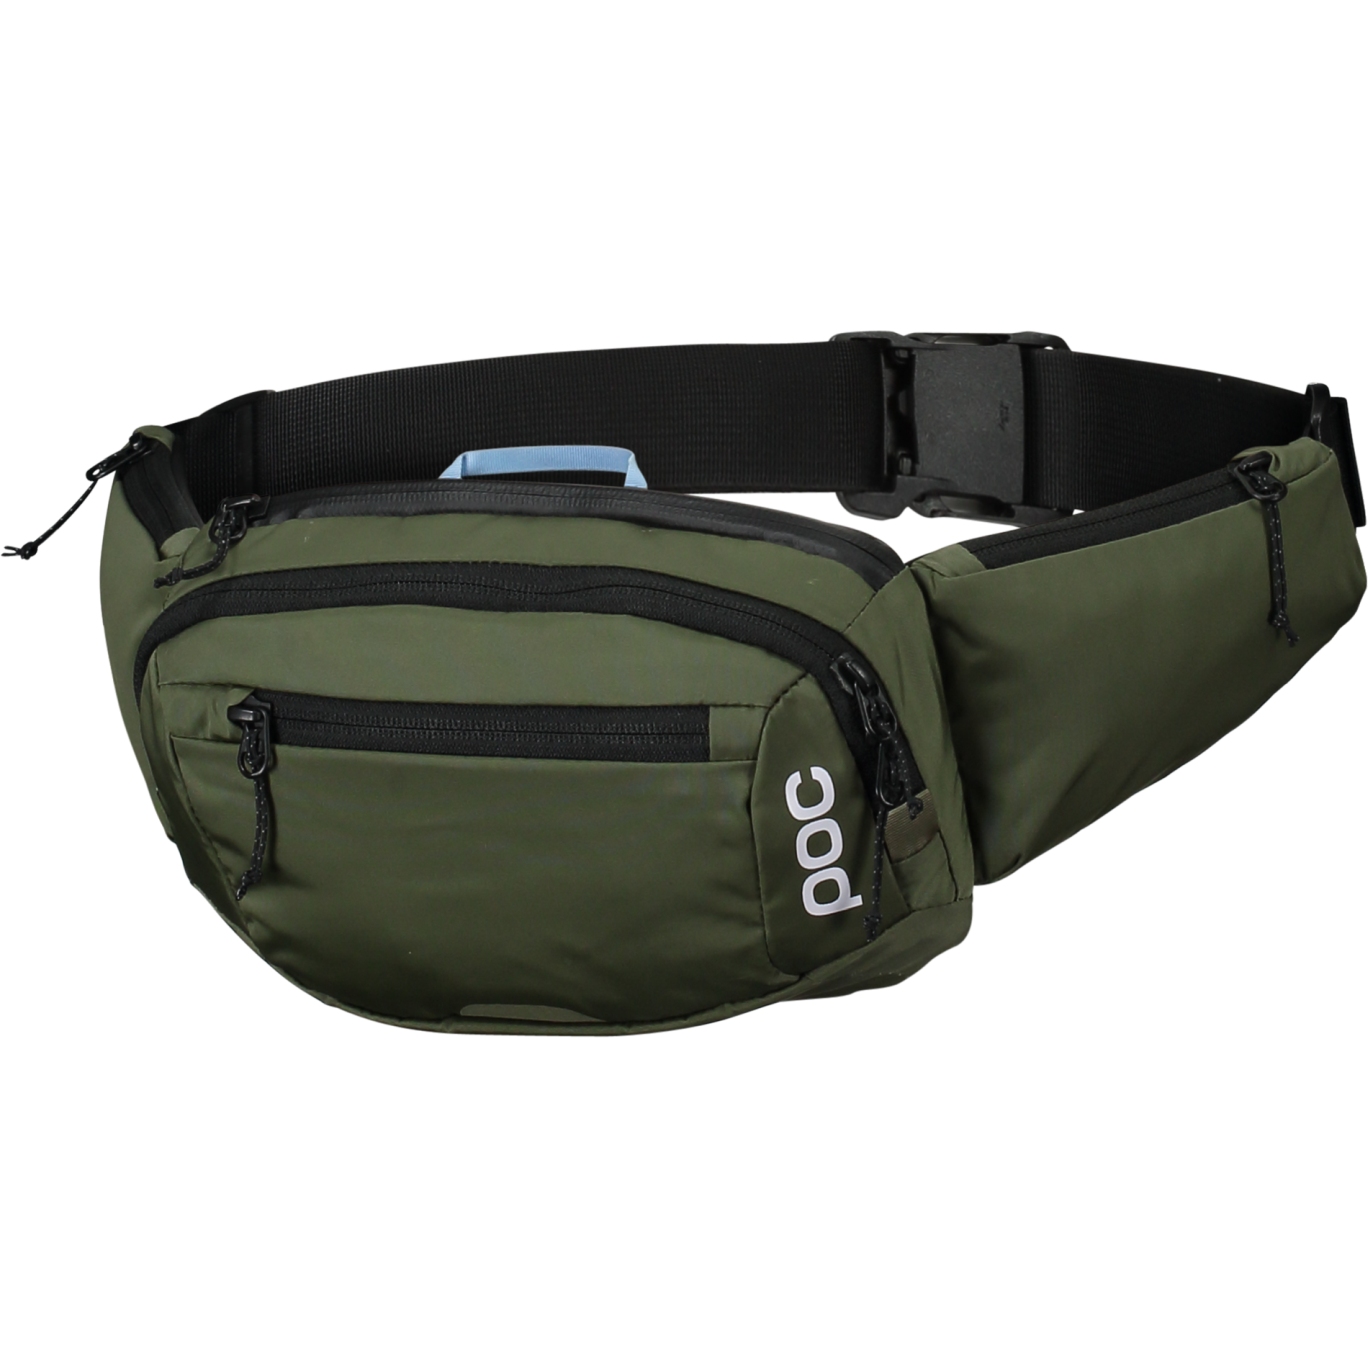 Picture of POC Lamina Hip Pack Waist Pack - 1460 epidote green